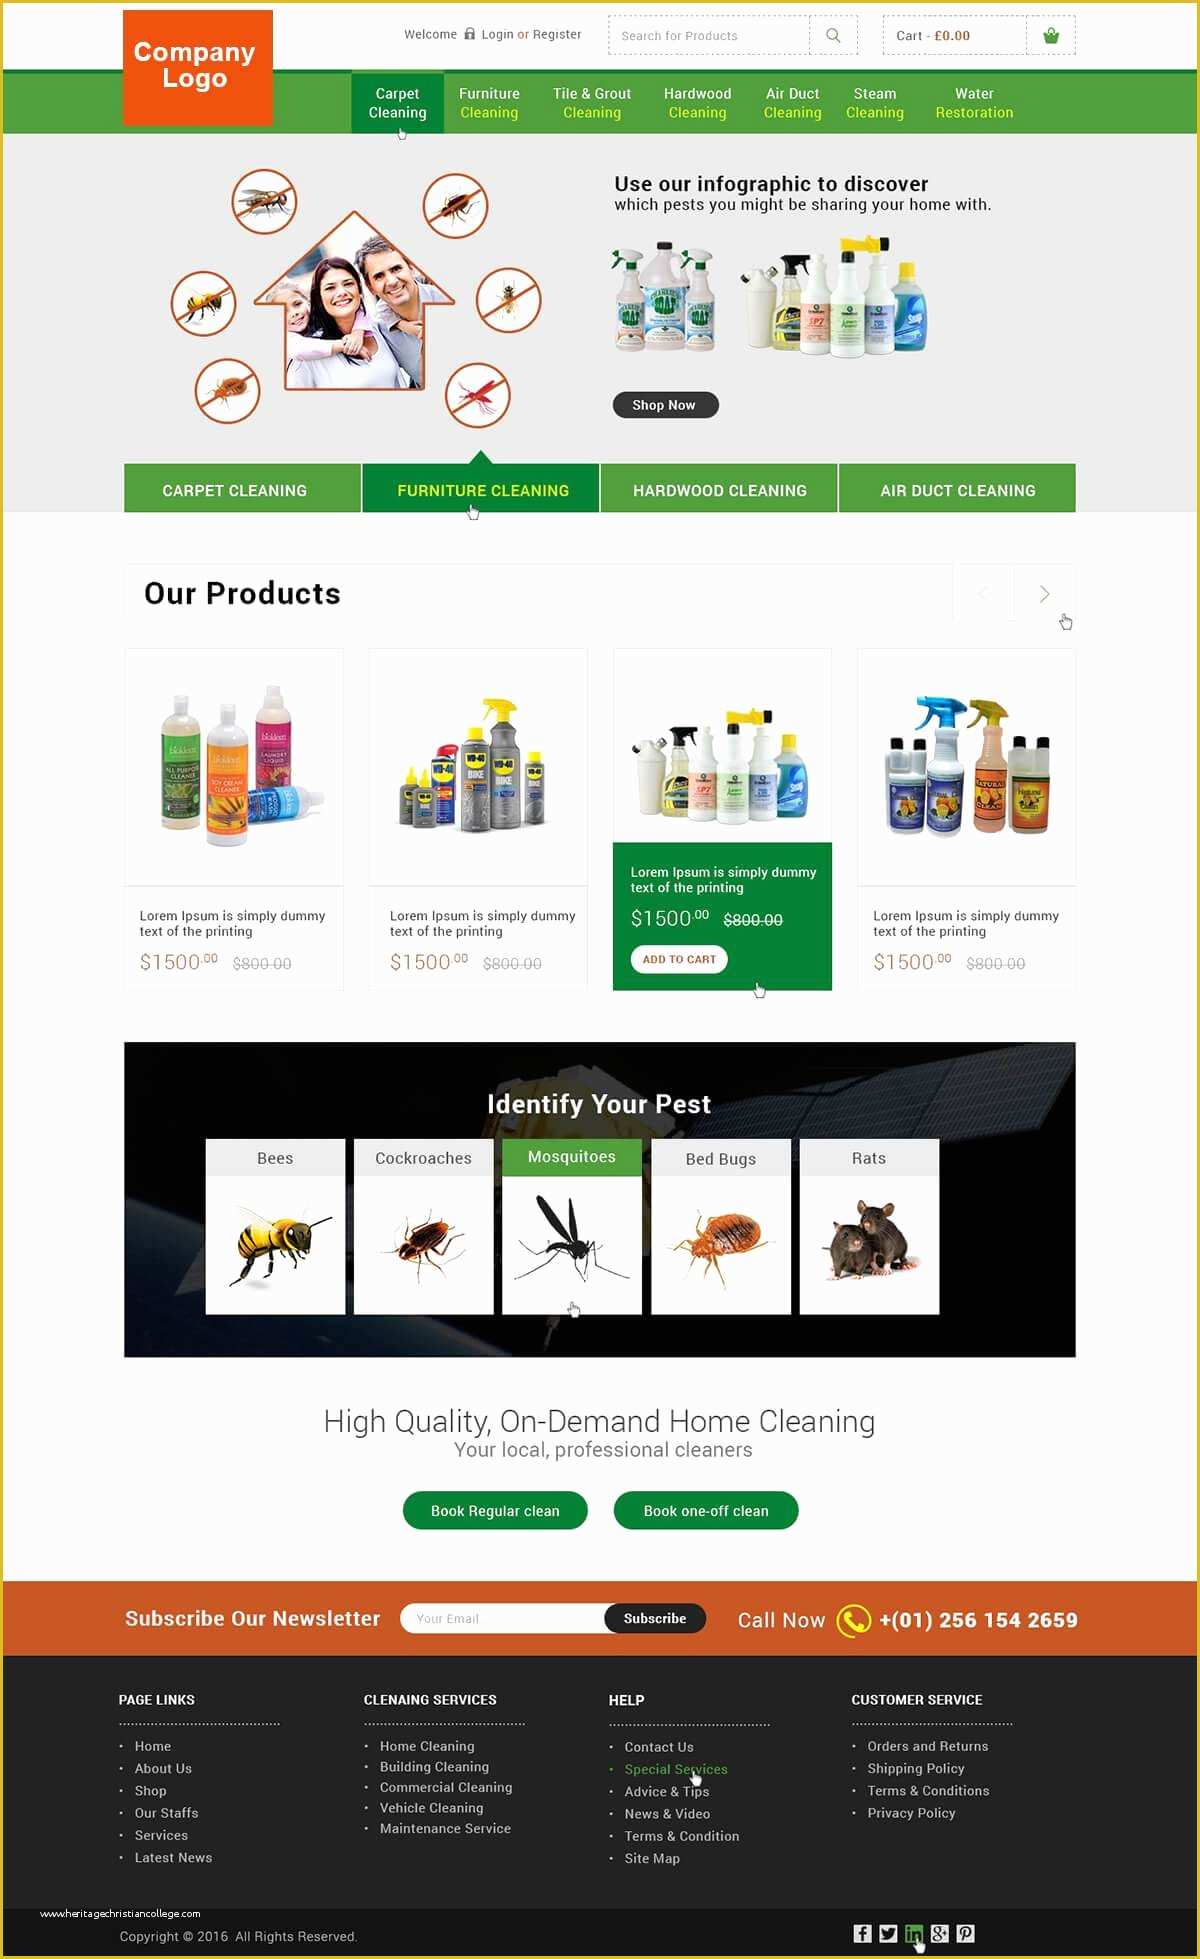 Pest Control Website Templates Free Download Of Pest Control Website Templates or Pest Control Service